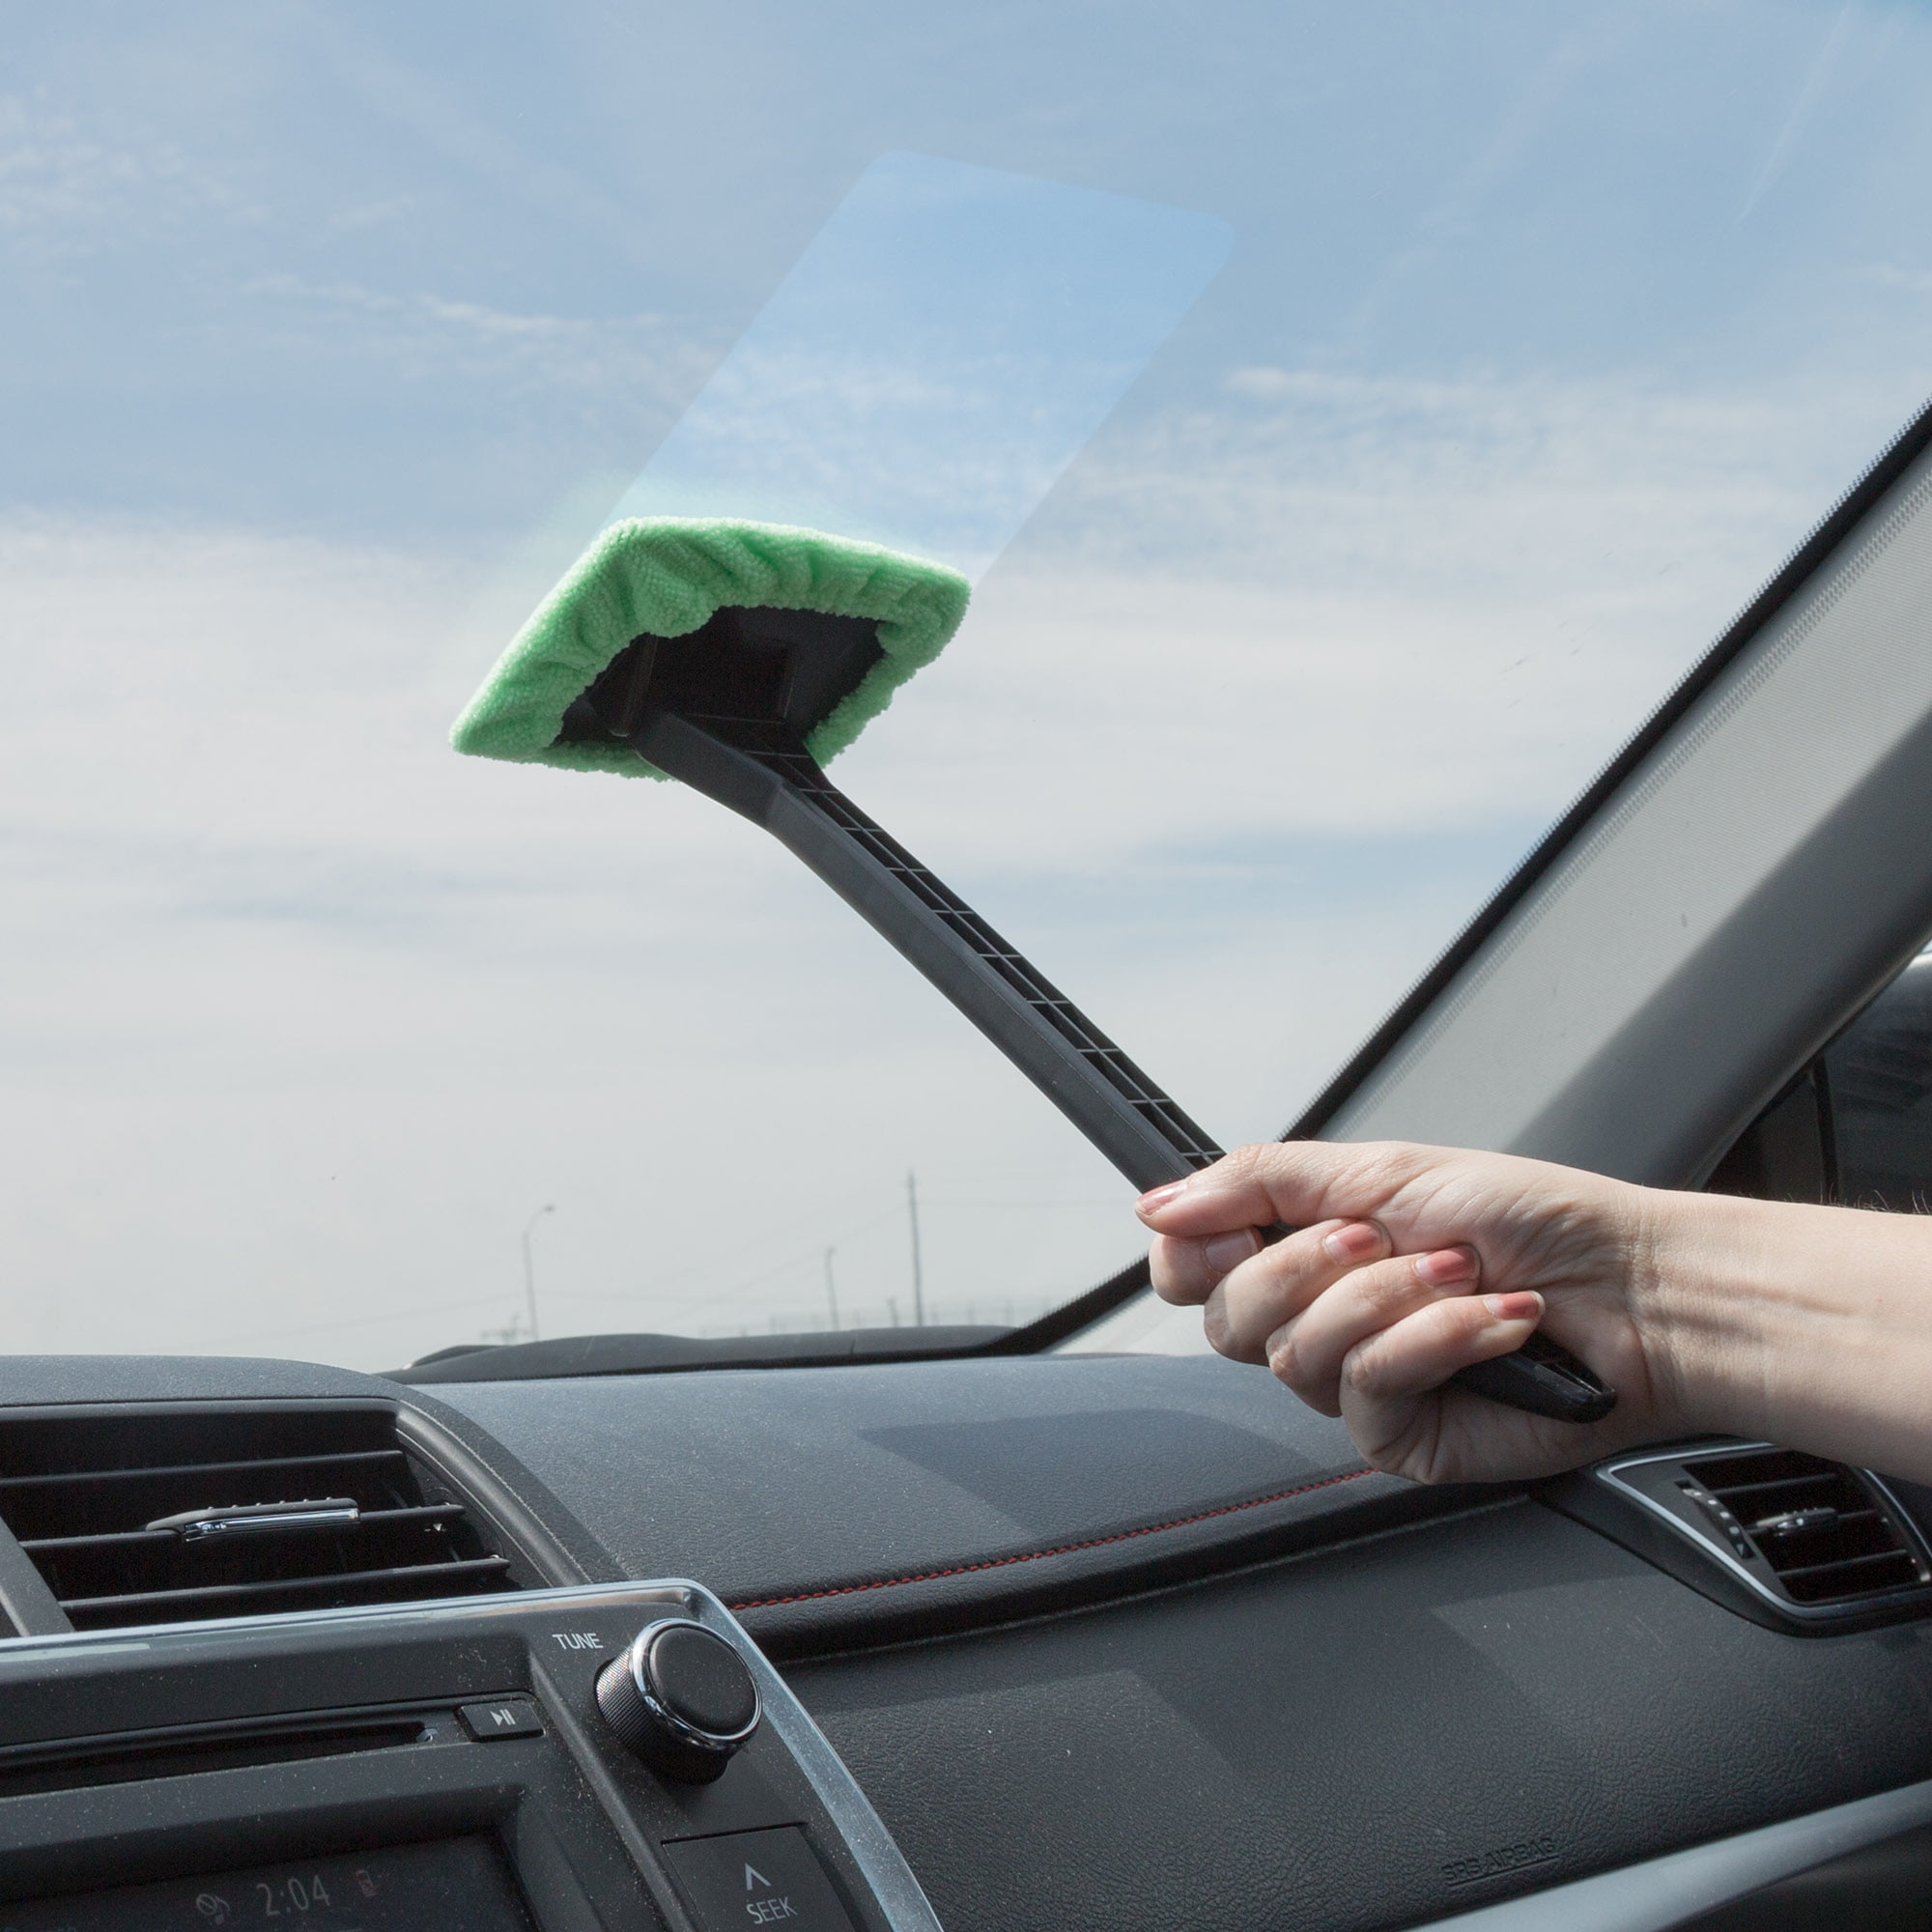 Car Windshield Cleaner Tools Inside Window Glass Wipers Microfiber Pa